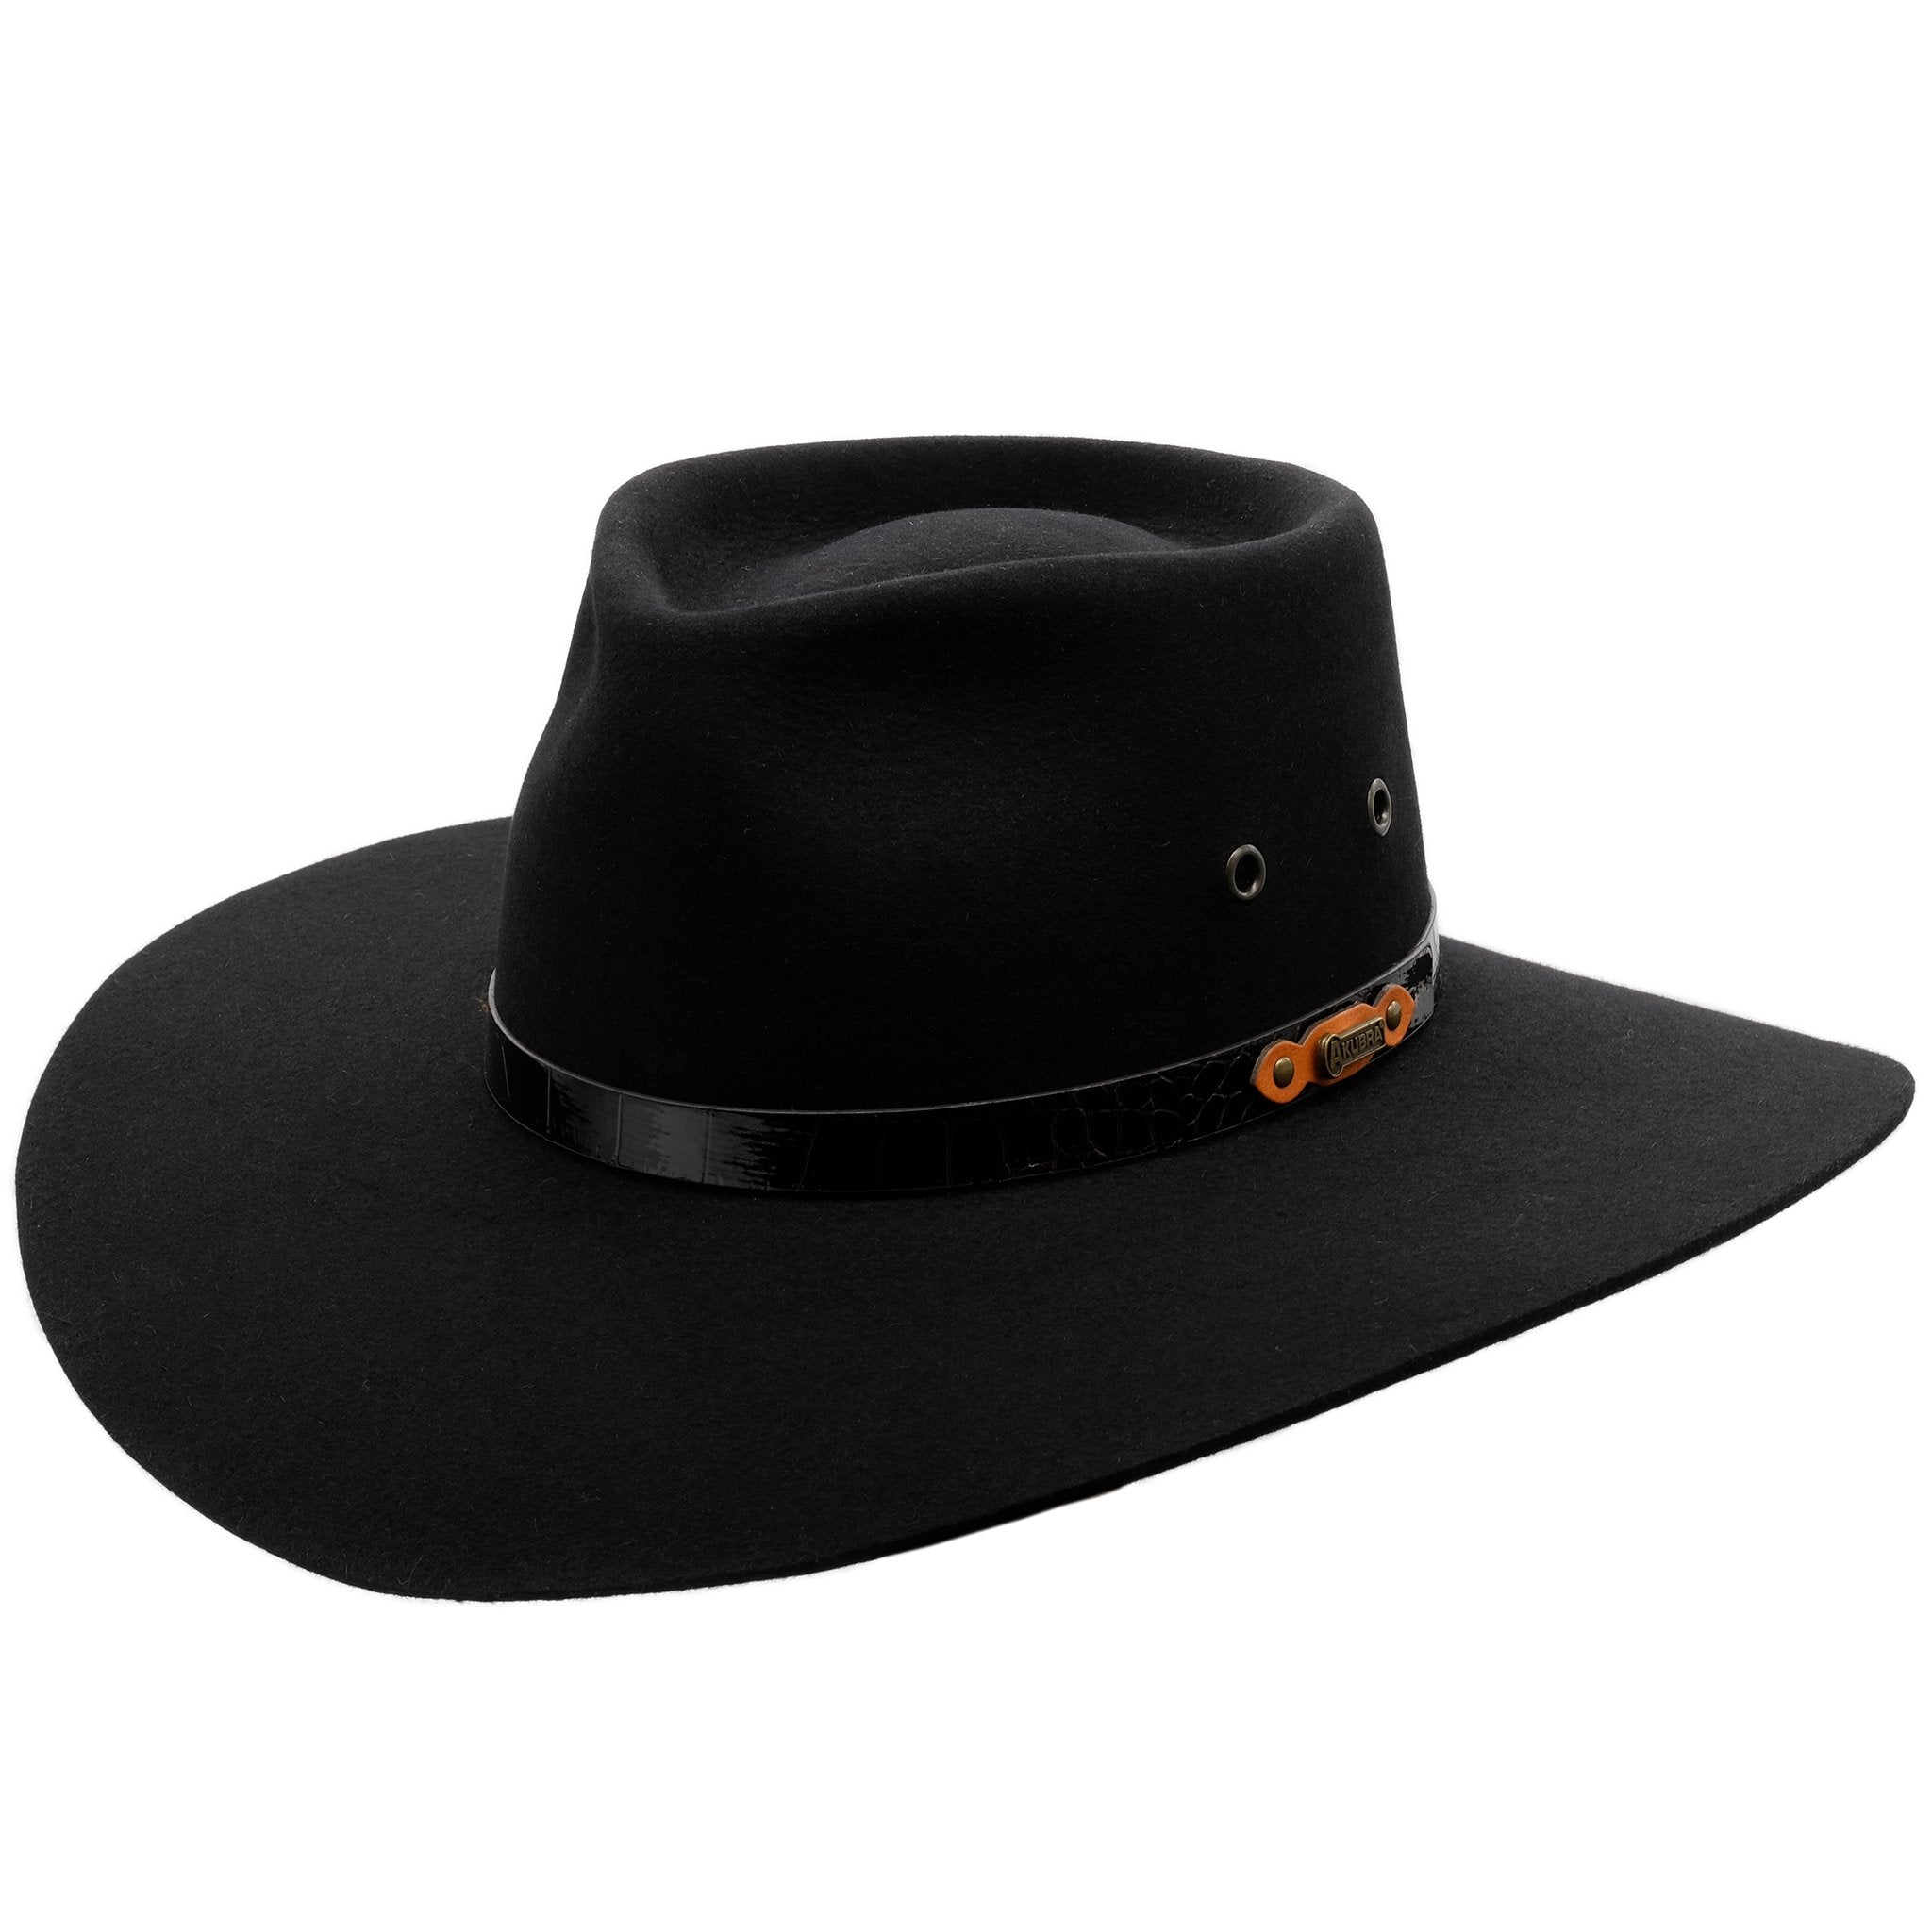 Angle view of Akubra Territory hat in black